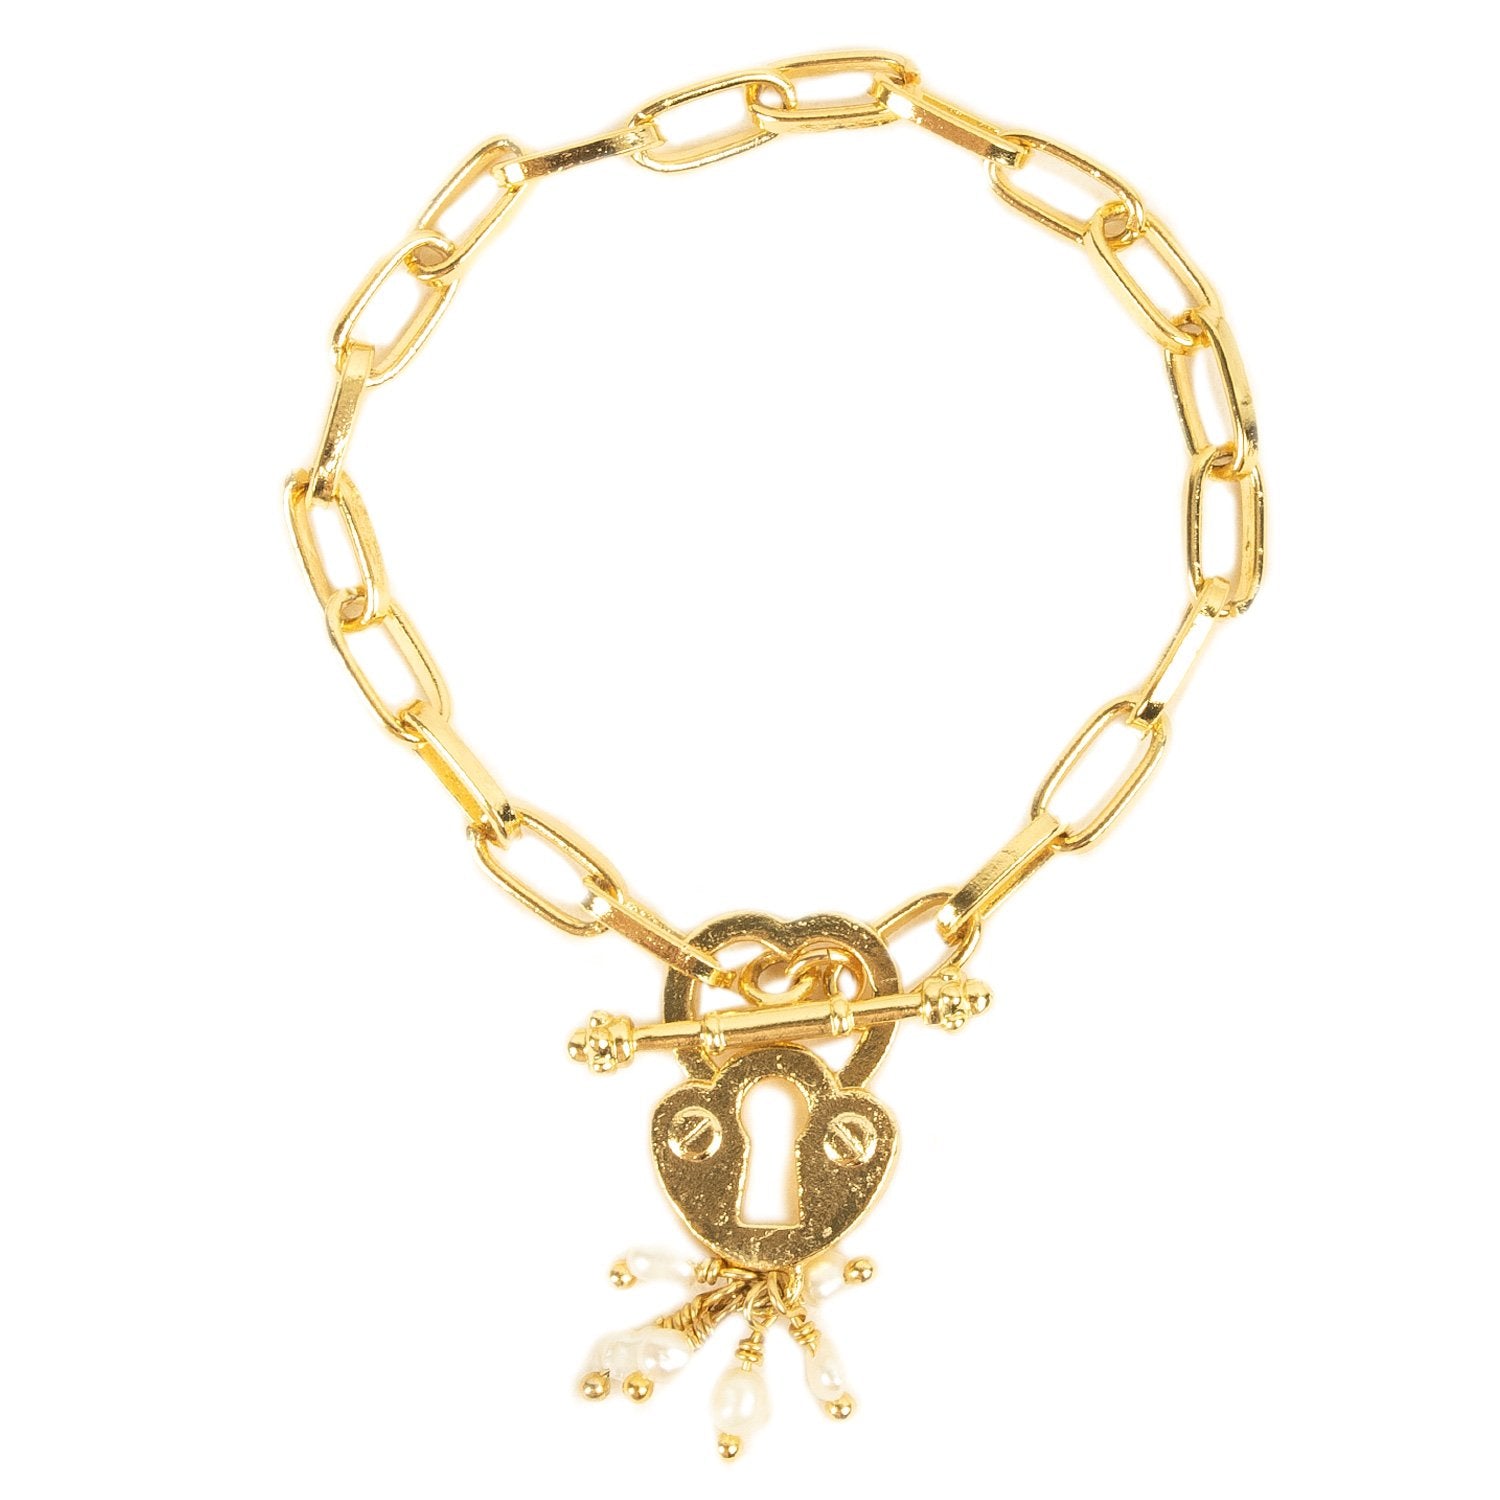 Gold bracelet with lock charm and pearl details